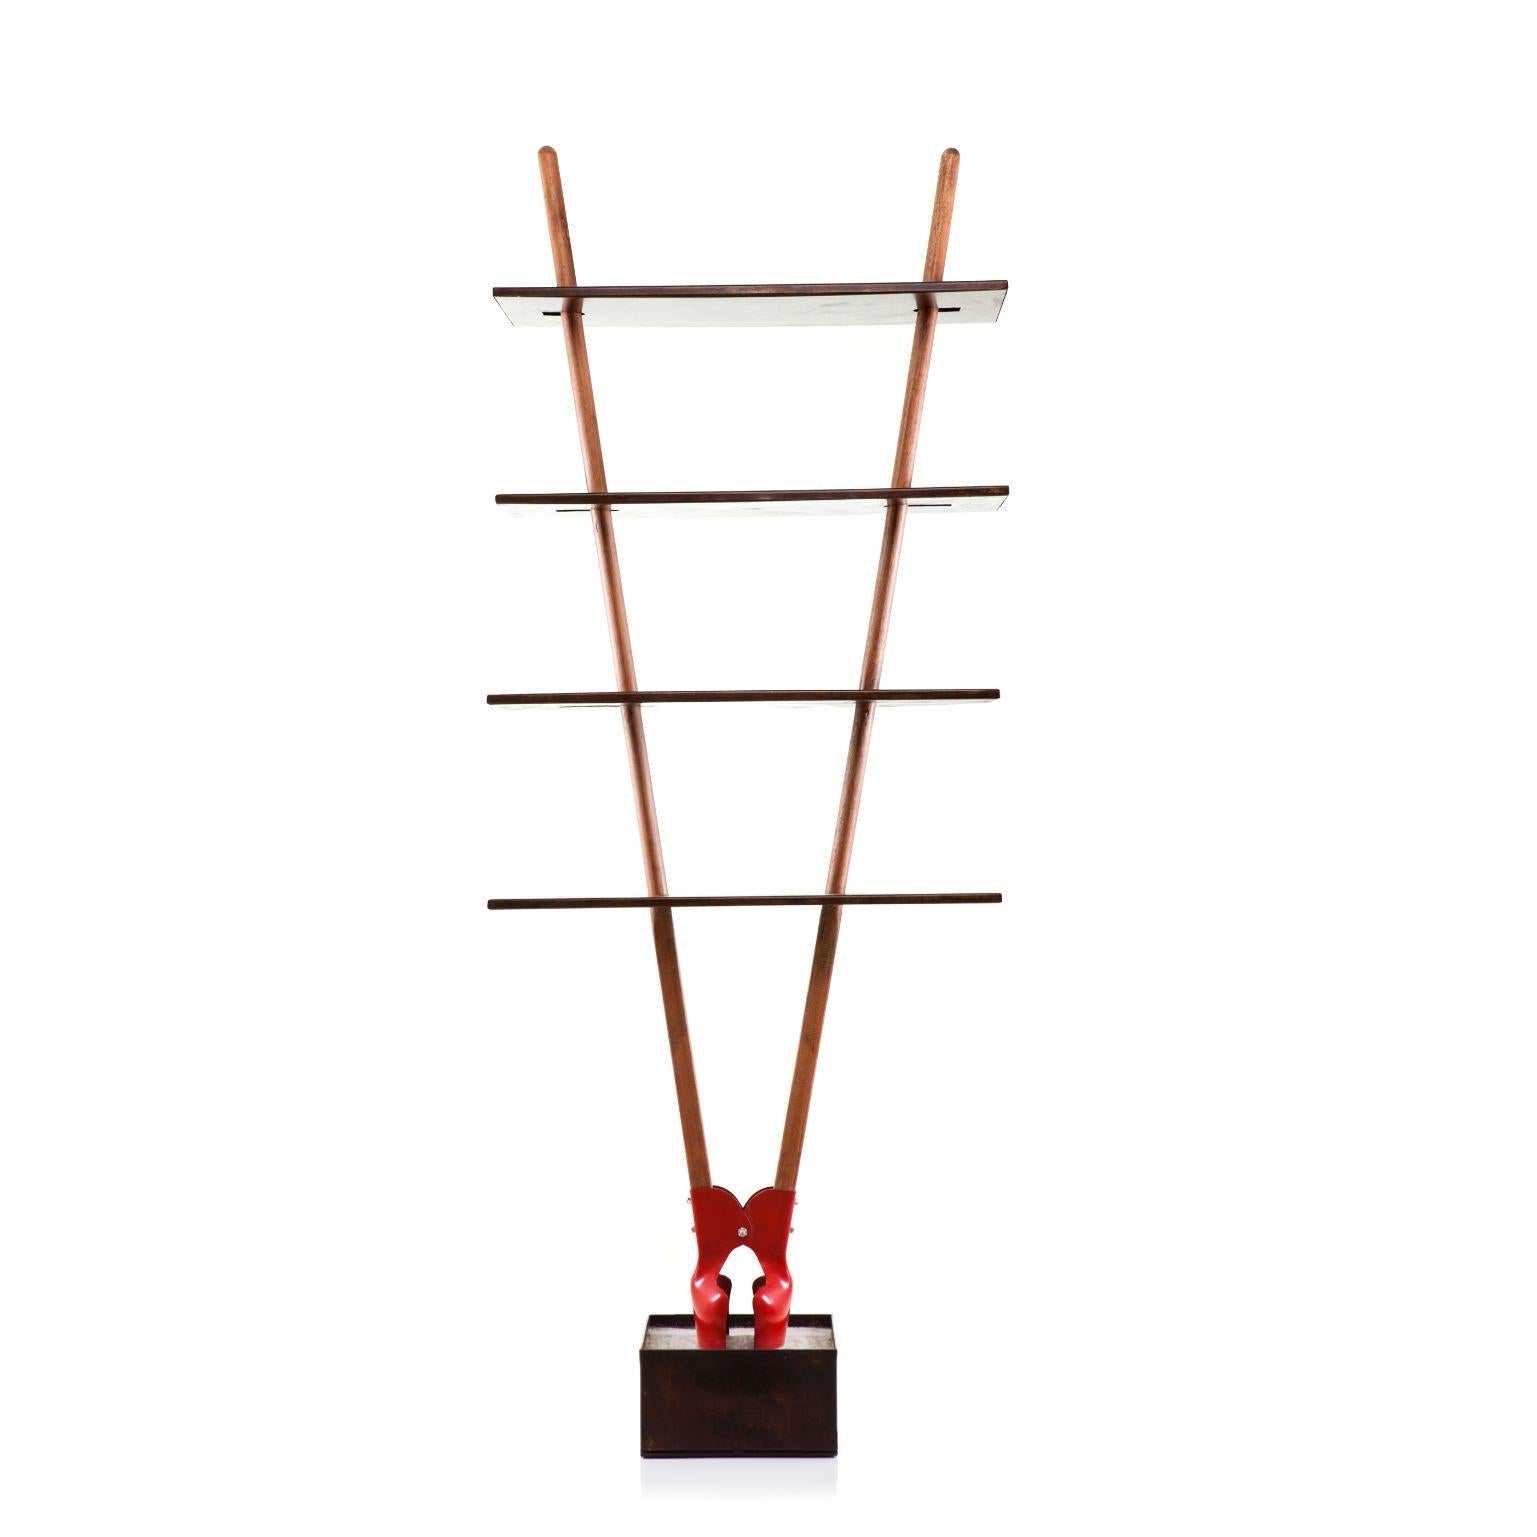 Da Pa Vermelha - shelve by Cultivado Em Casa
Dimensions: 80 x 30 x 205 cm
Materials: Digger, carbon steel and concrete.

Shelf built from an articulated shovel, a hand tool widely used in agriculture and civil construction. The tool rests on a